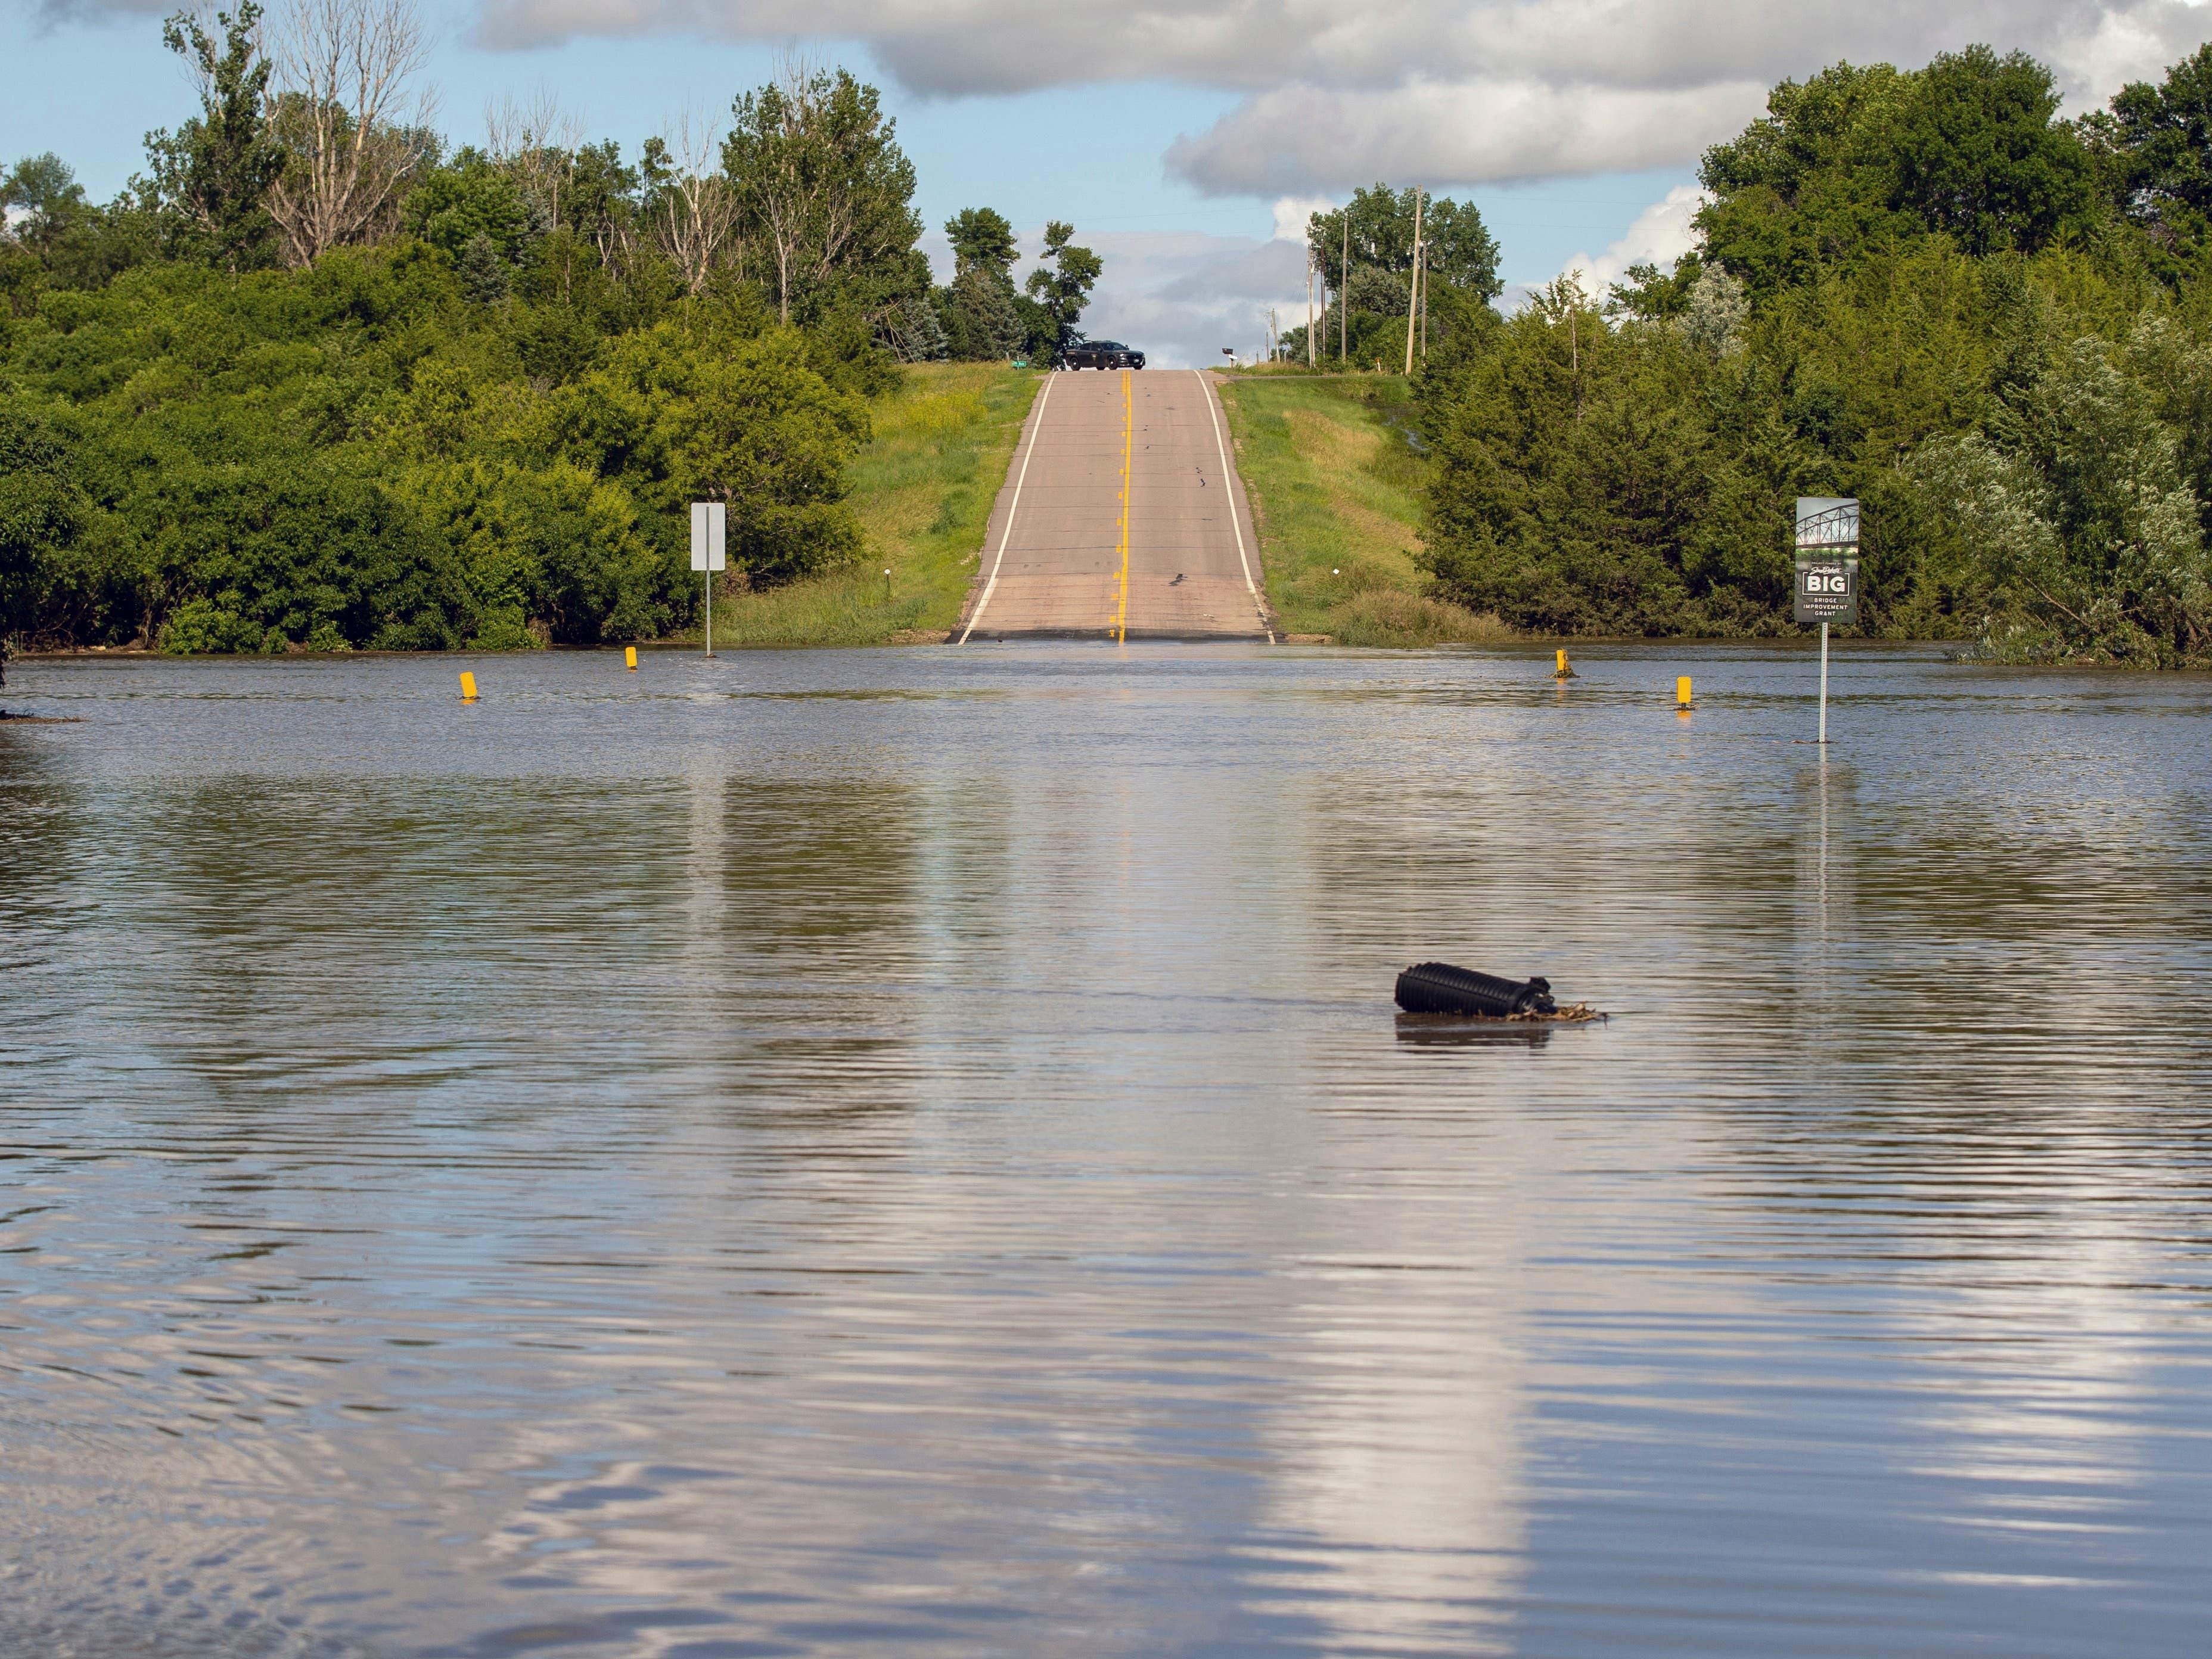 Sweltering temperatures persist across US, while floodwaters inundate Midwest